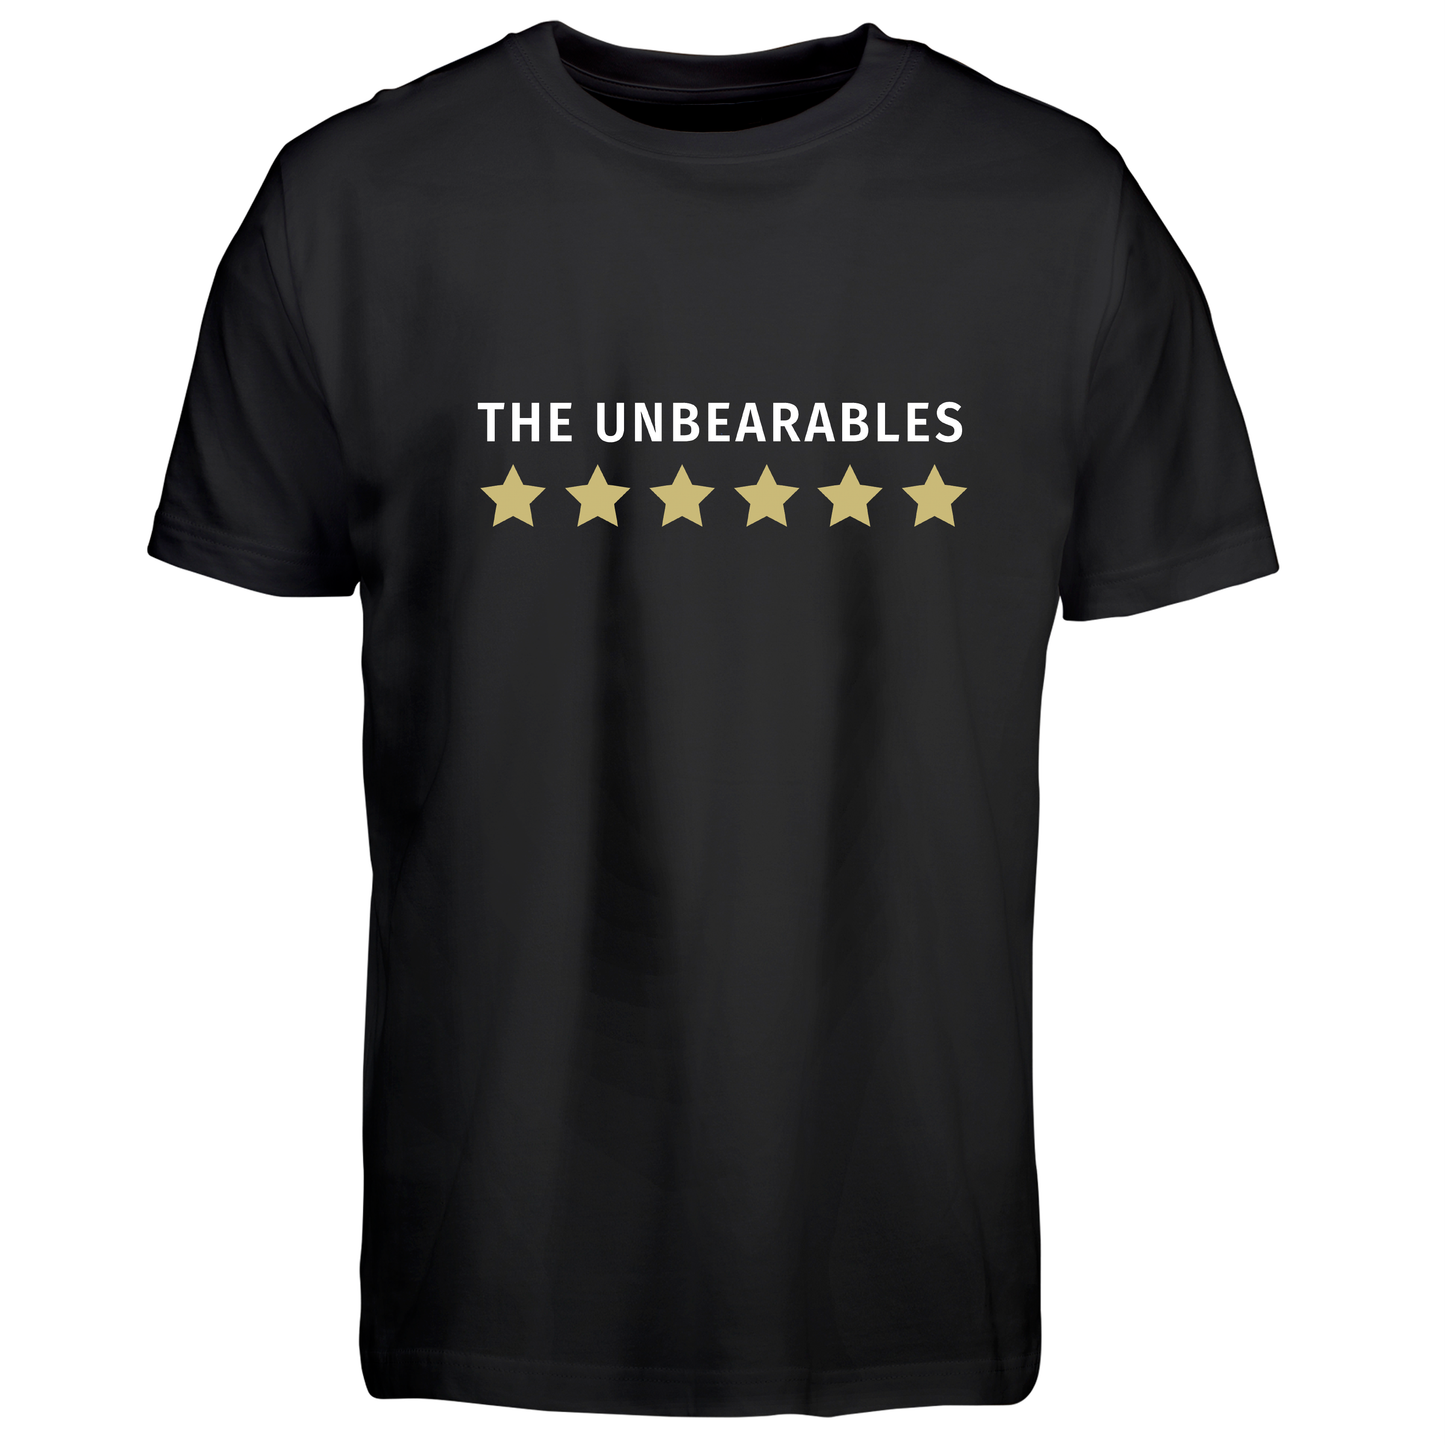 The Unbearables